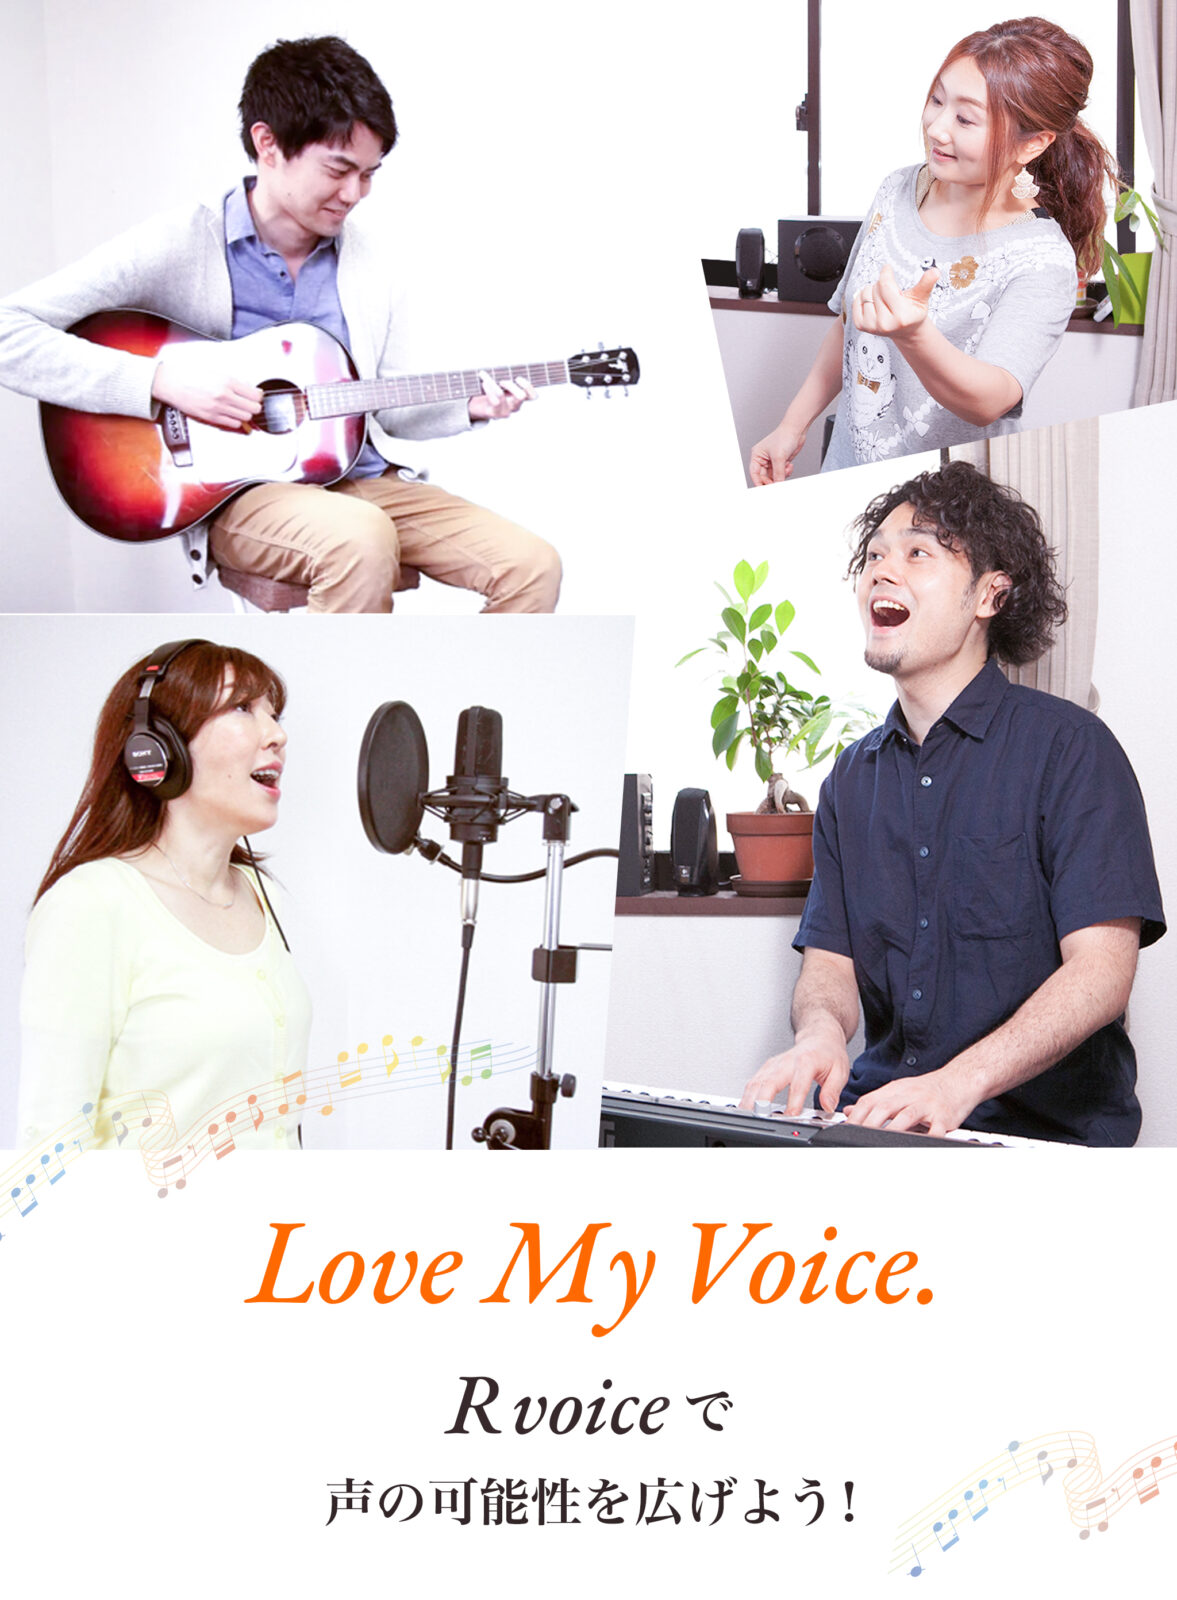 R voice - 東京都王子駅のボイトレ・声楽・ギター弾き語り教室